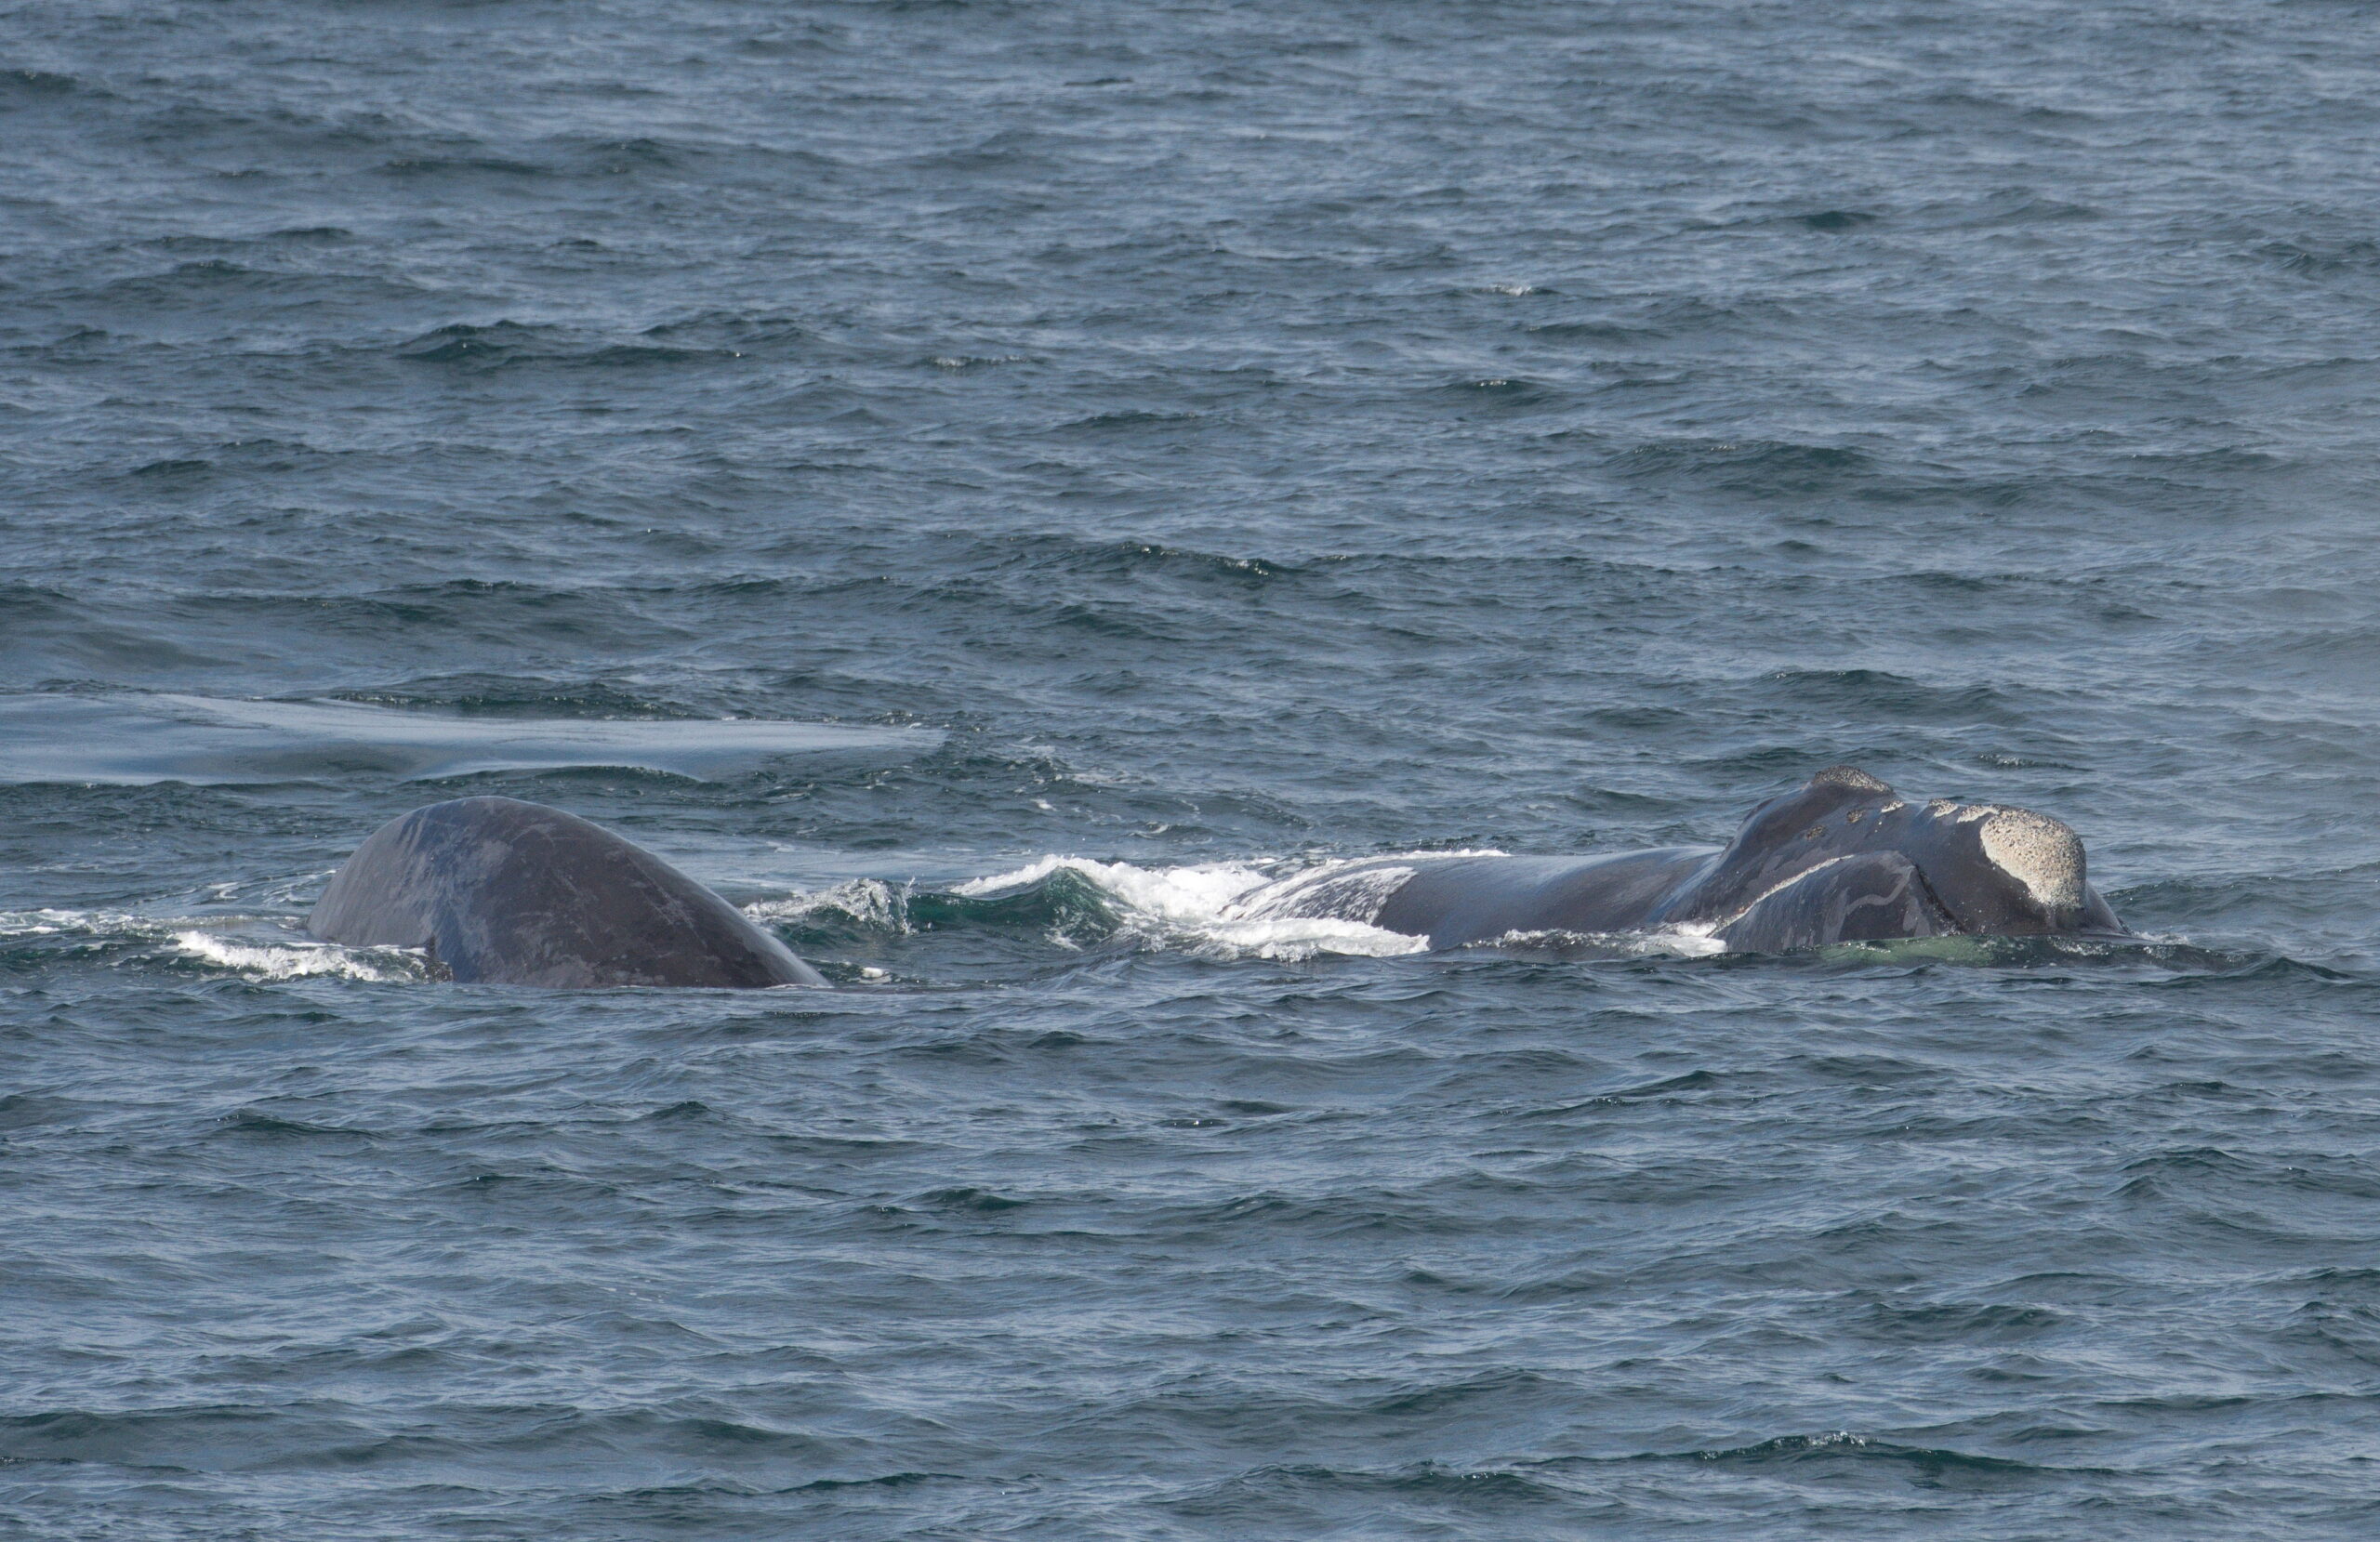 MML DY2107 20210821 S579 ACU 2294 scaled Why the Recent Sighting of Right Whales off Alaska is Such a Big Deal